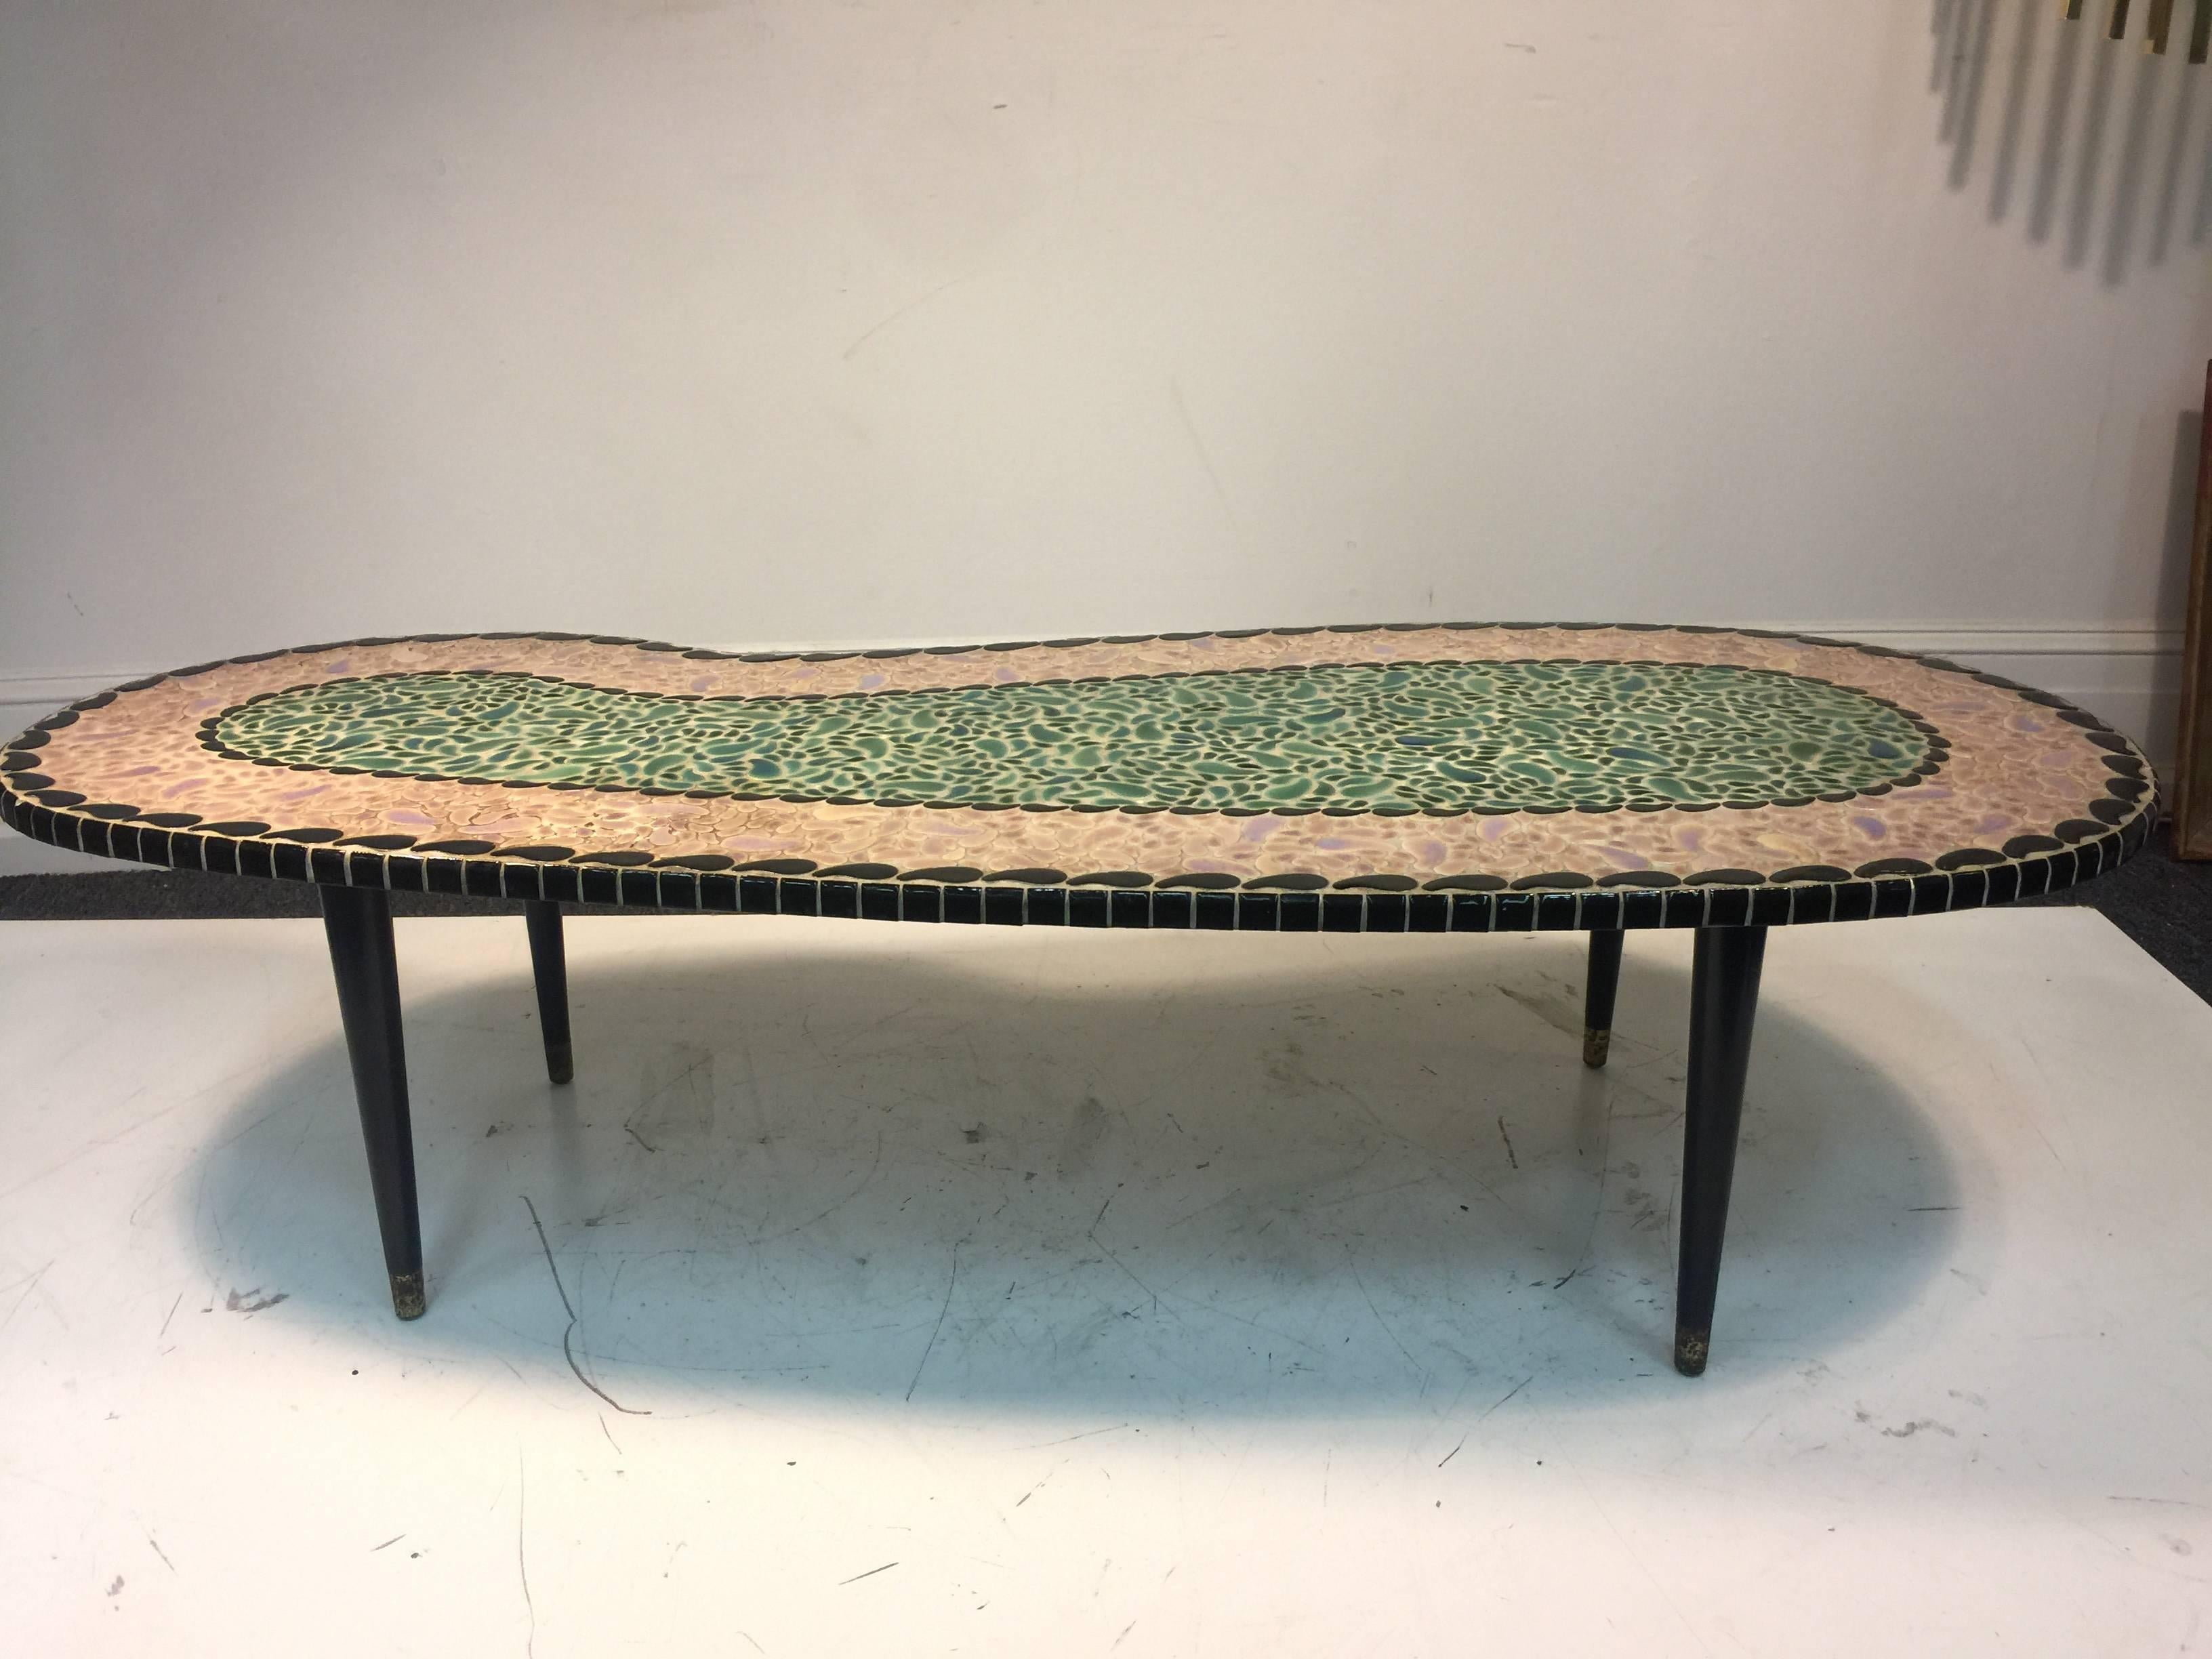 A magnificent mosaic tile top coffee table with beautiful colors, unusual kidney or boomerang shape and tapered legs with brass accent caps, circa 1970.